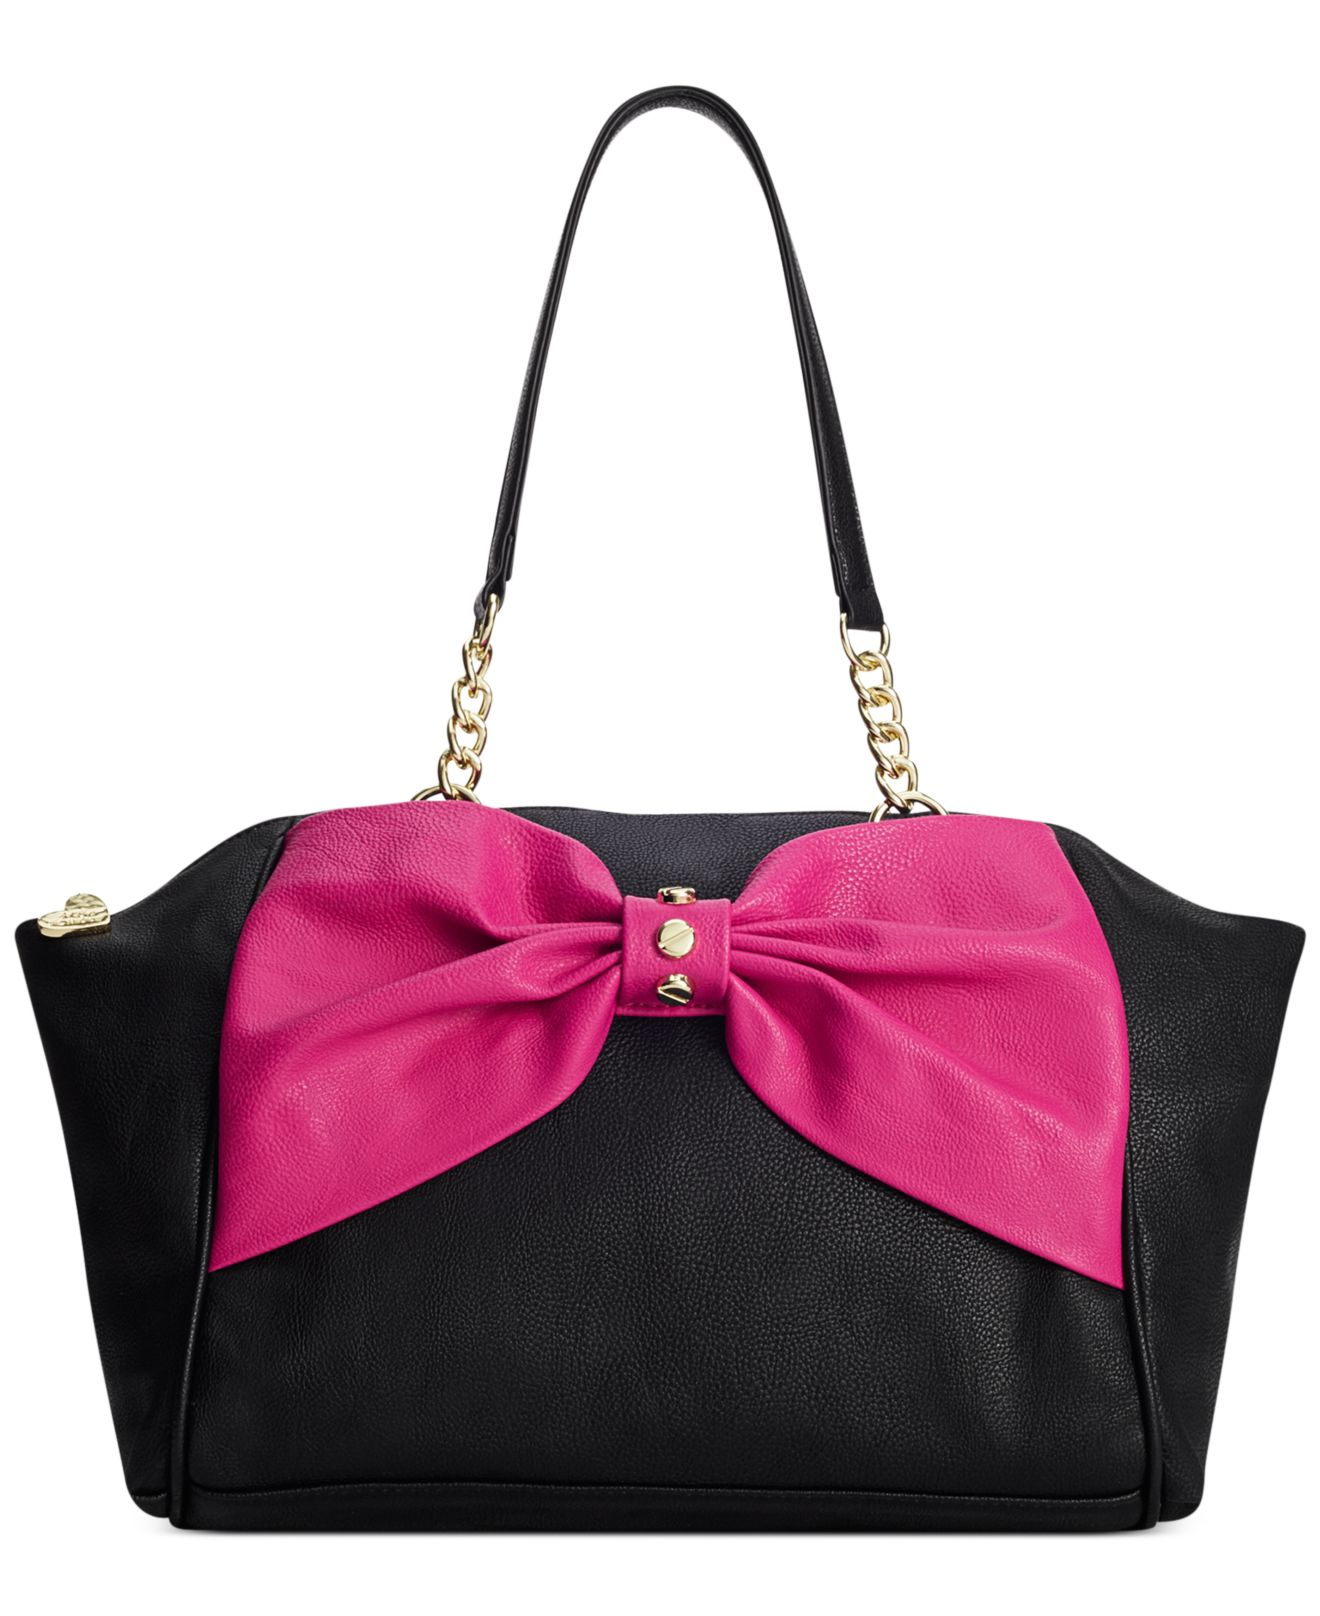 Lyst - Betsey Johnson Dome Satchel in Pink